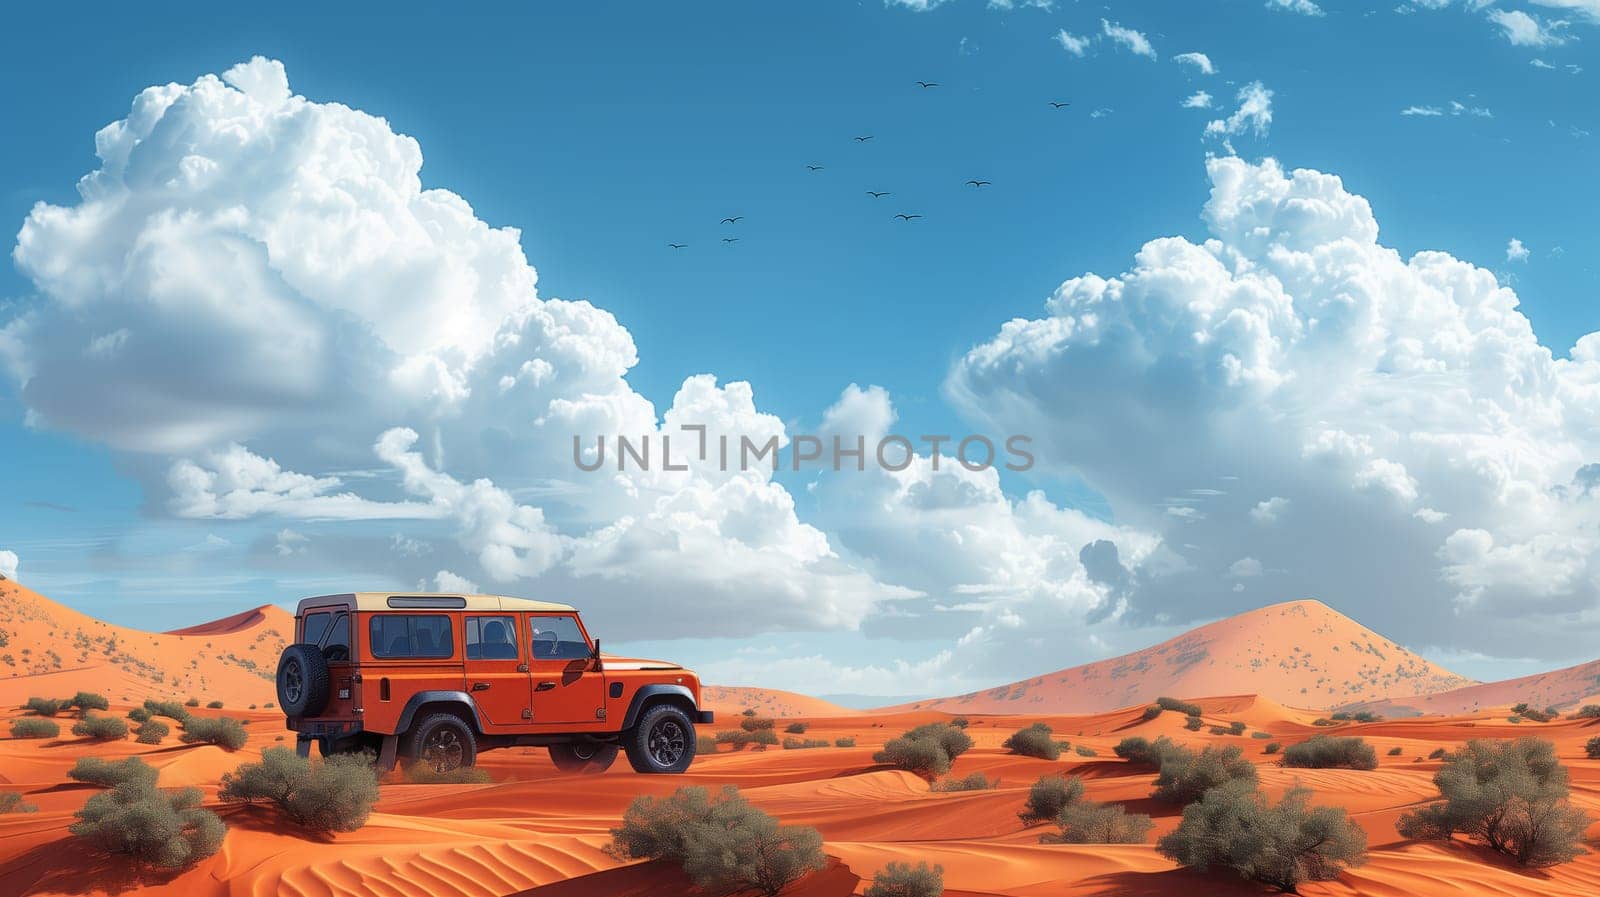 An orange truck is parked in the middle of an arid ecoregion, with the vast desert landscape stretching beyond under a clear blue sky with fluffy clouds